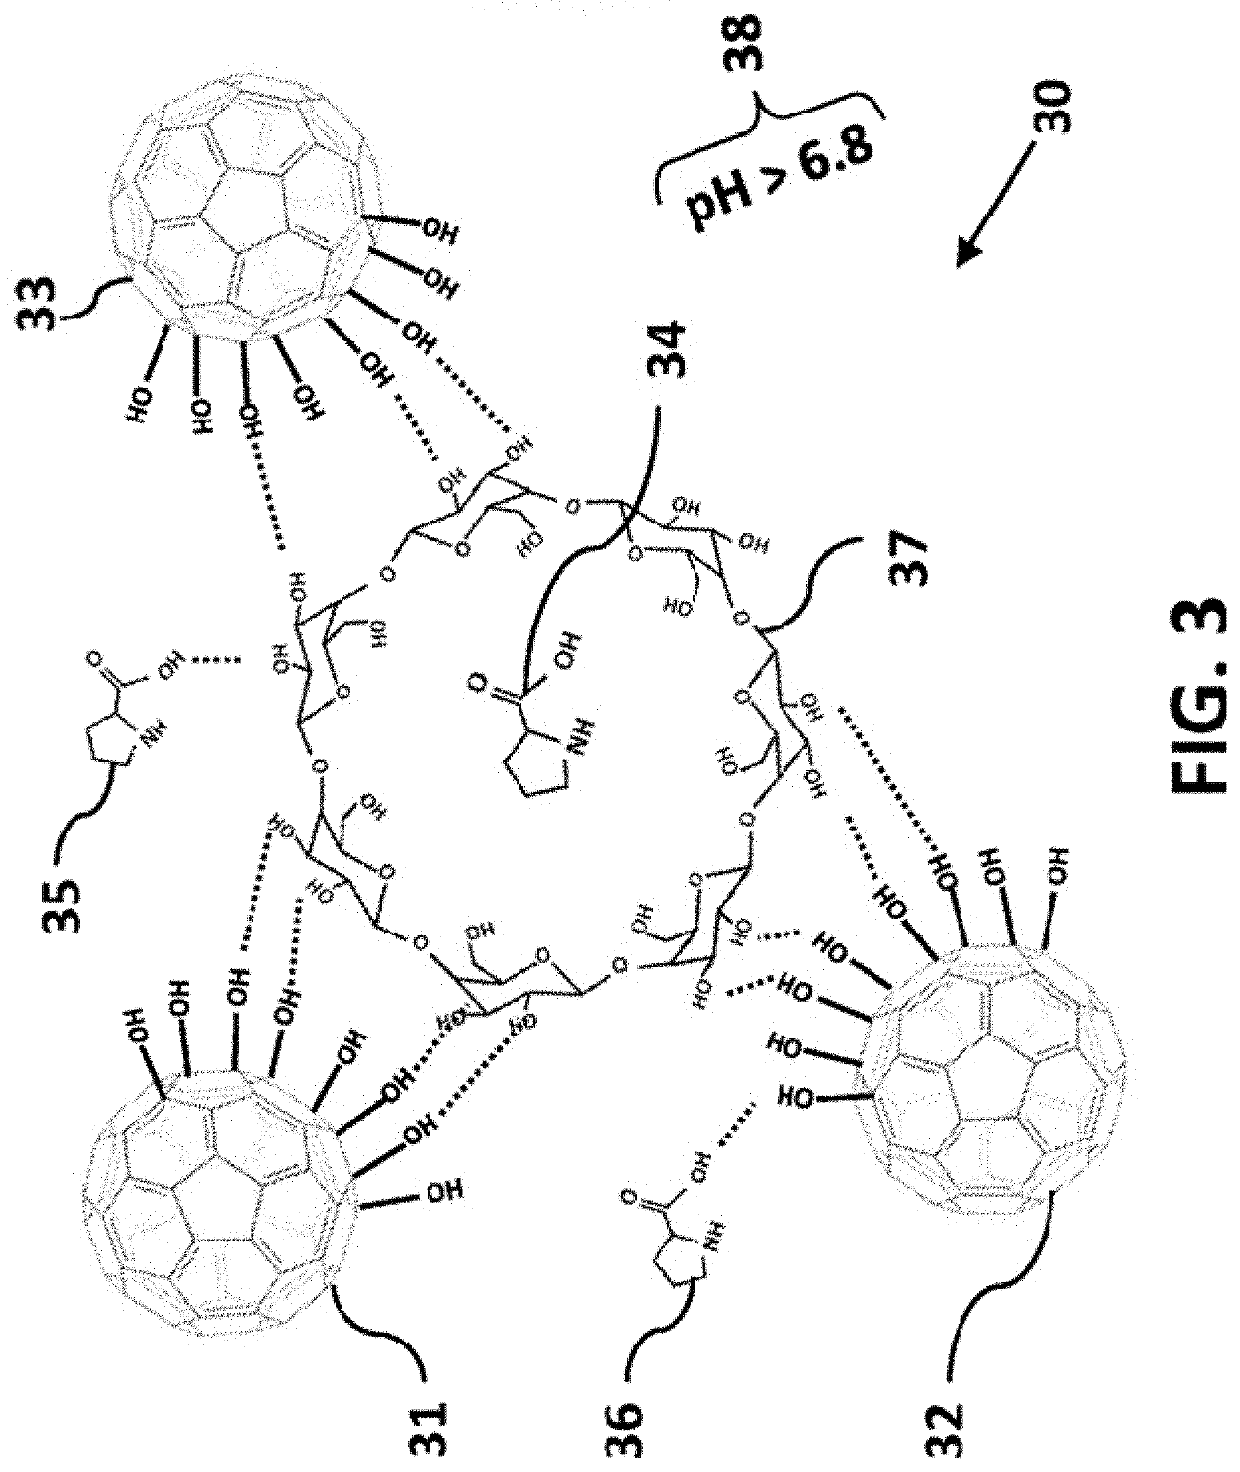 Anisotropic nanoparticle compositions and methods